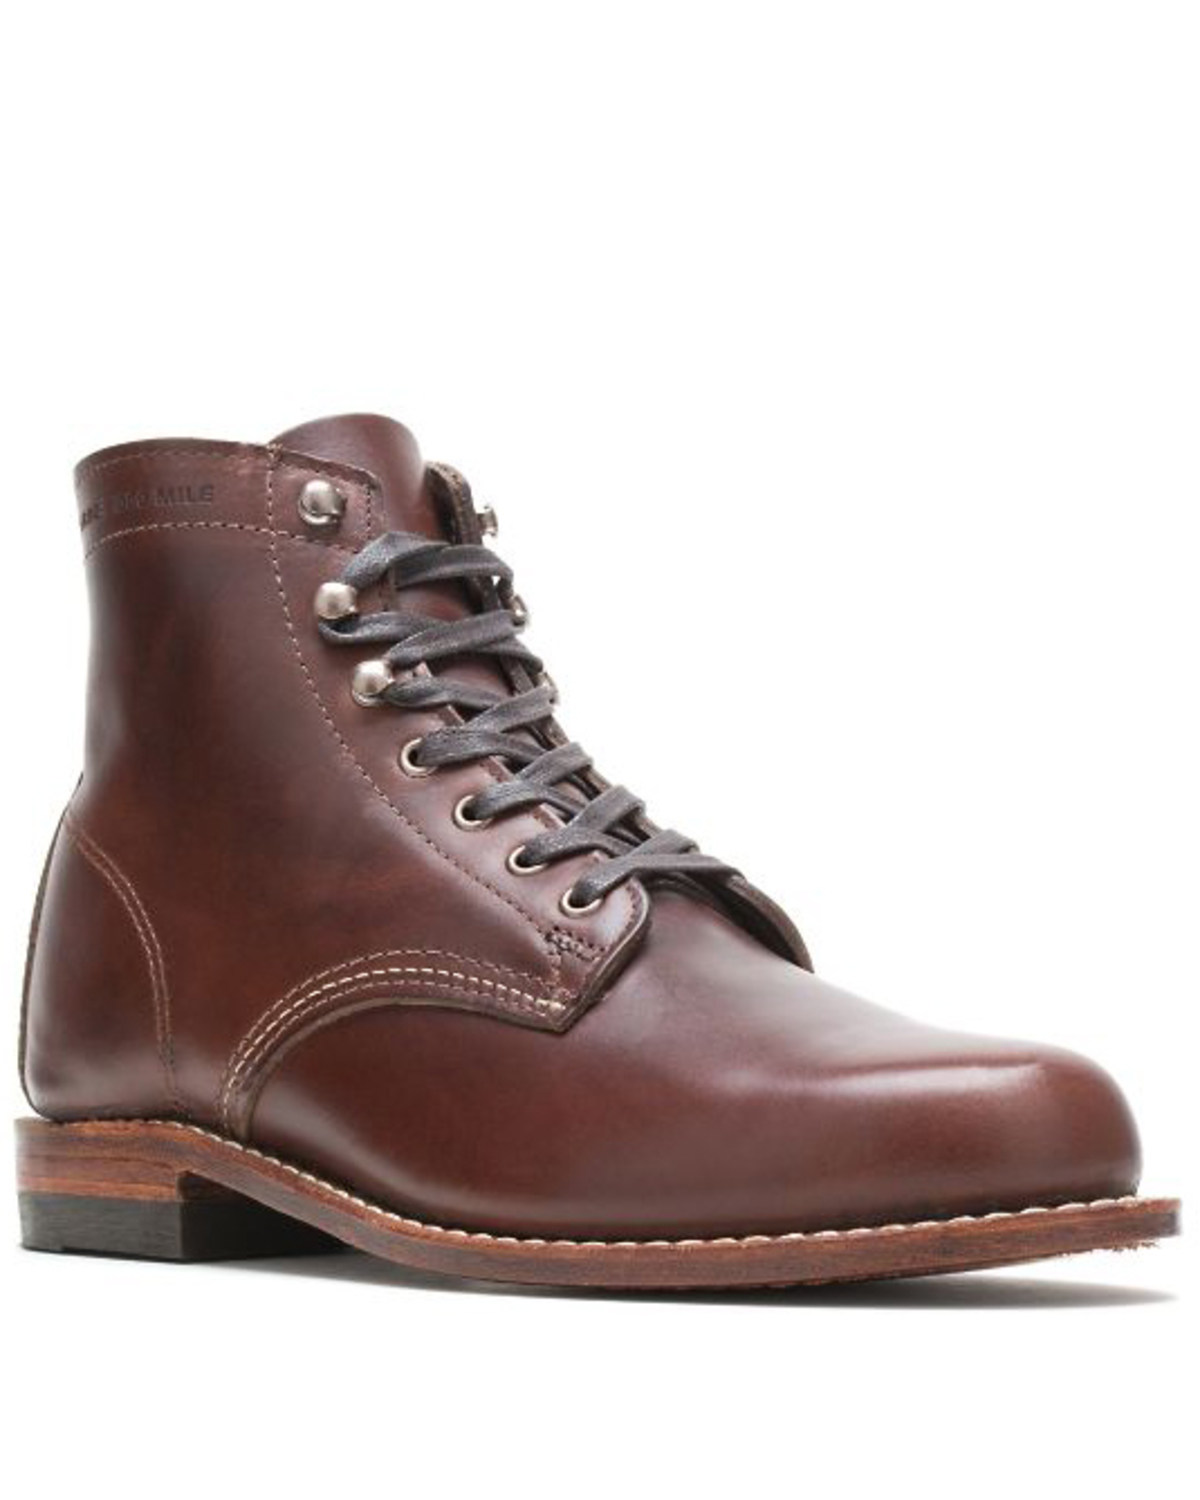 Wolverine Men's 1000 Mile Lace-Up Boots - Round Toe